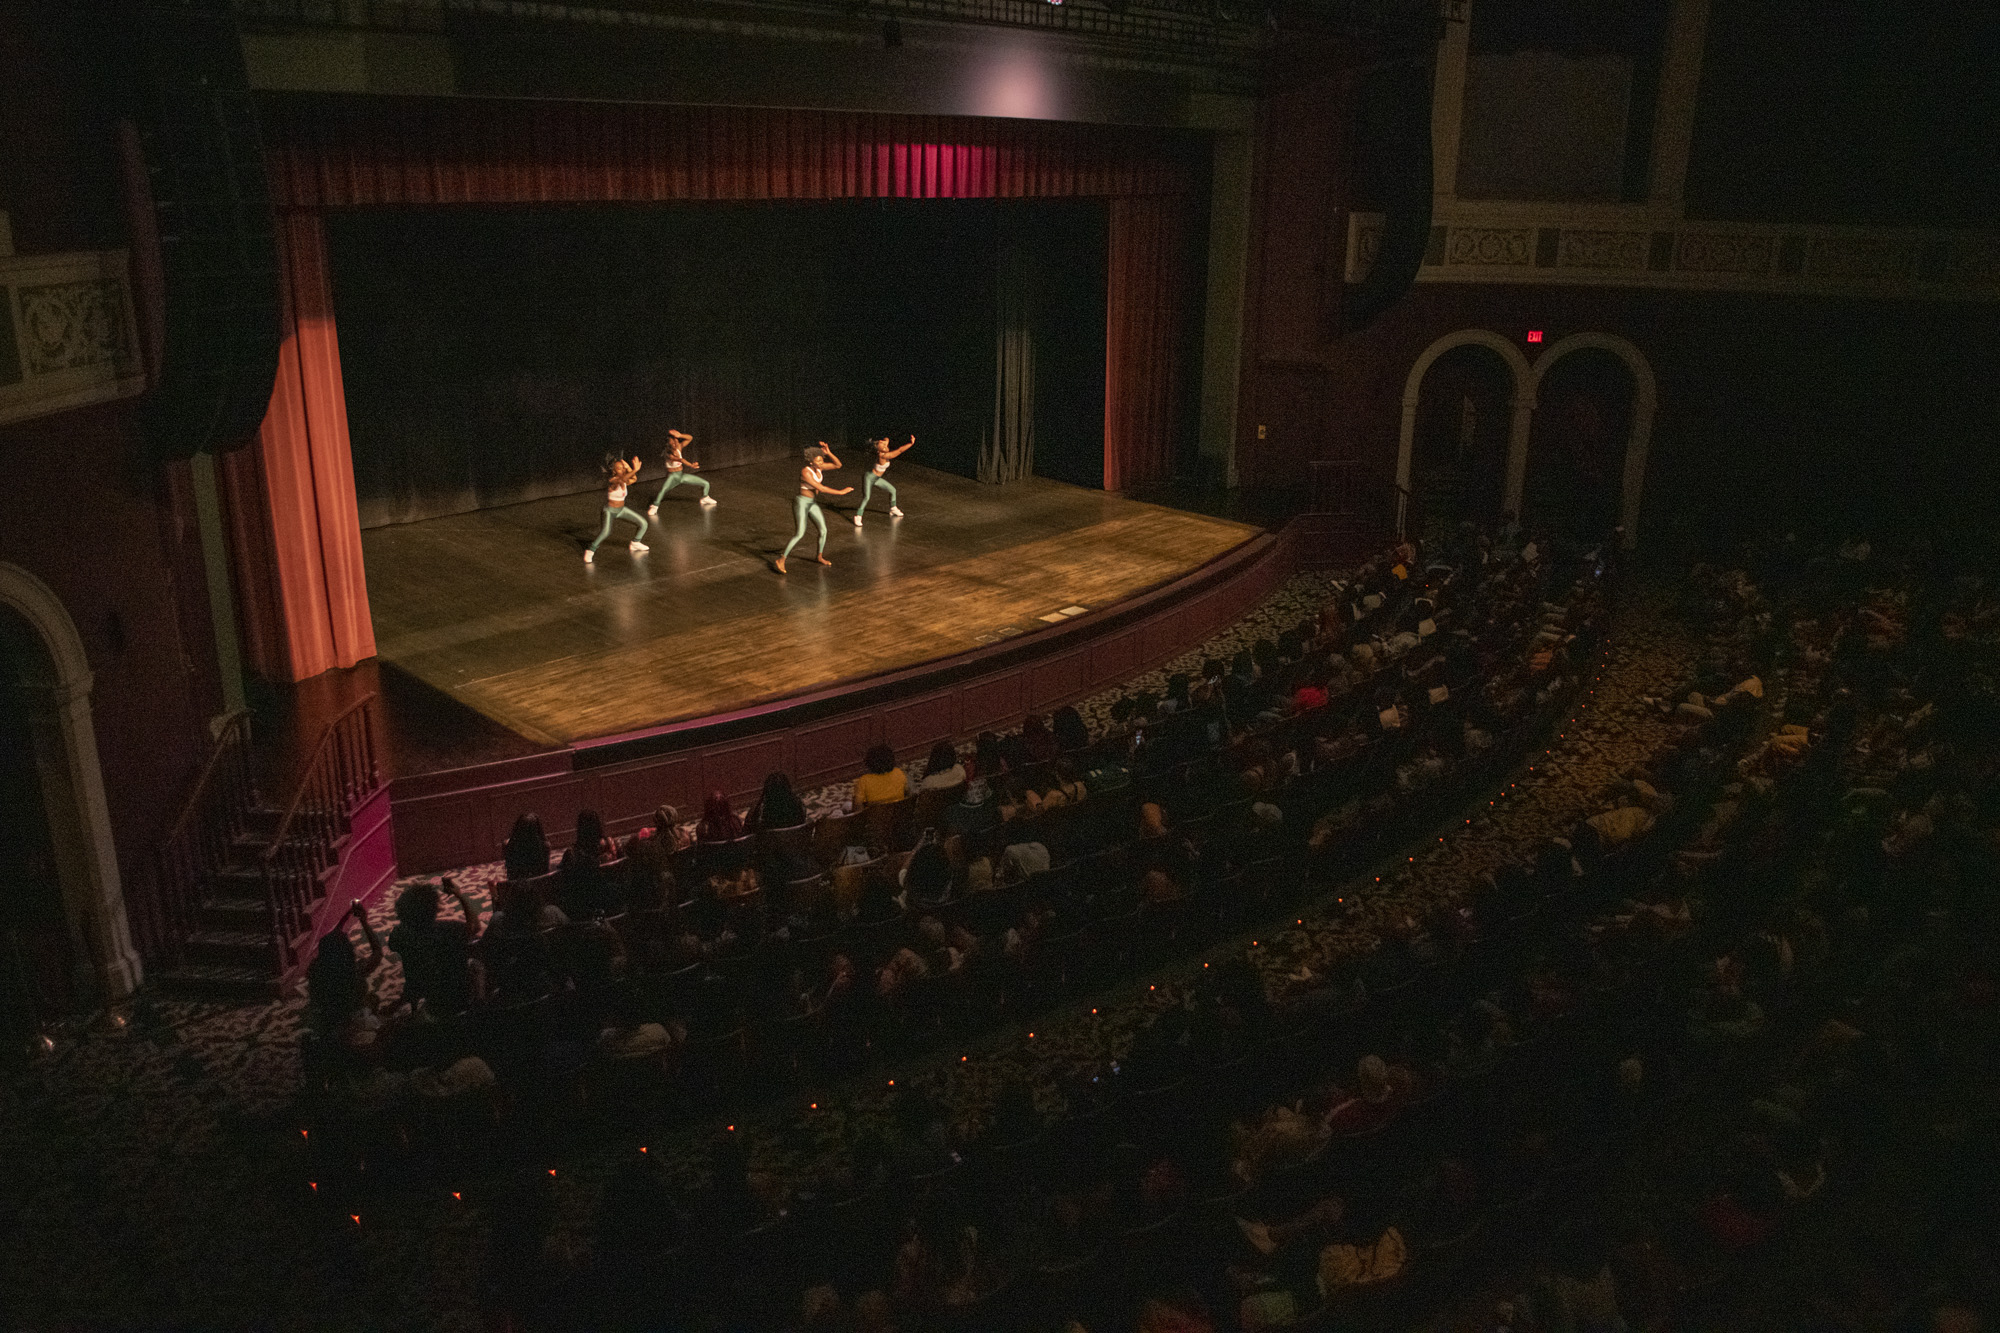 OHIO alumni and students packed Templeton-Blackburn Alumni Memorial Auditorium the evening of Sept. 17 for one of BAR’s most anticipated events, the Variety Show.